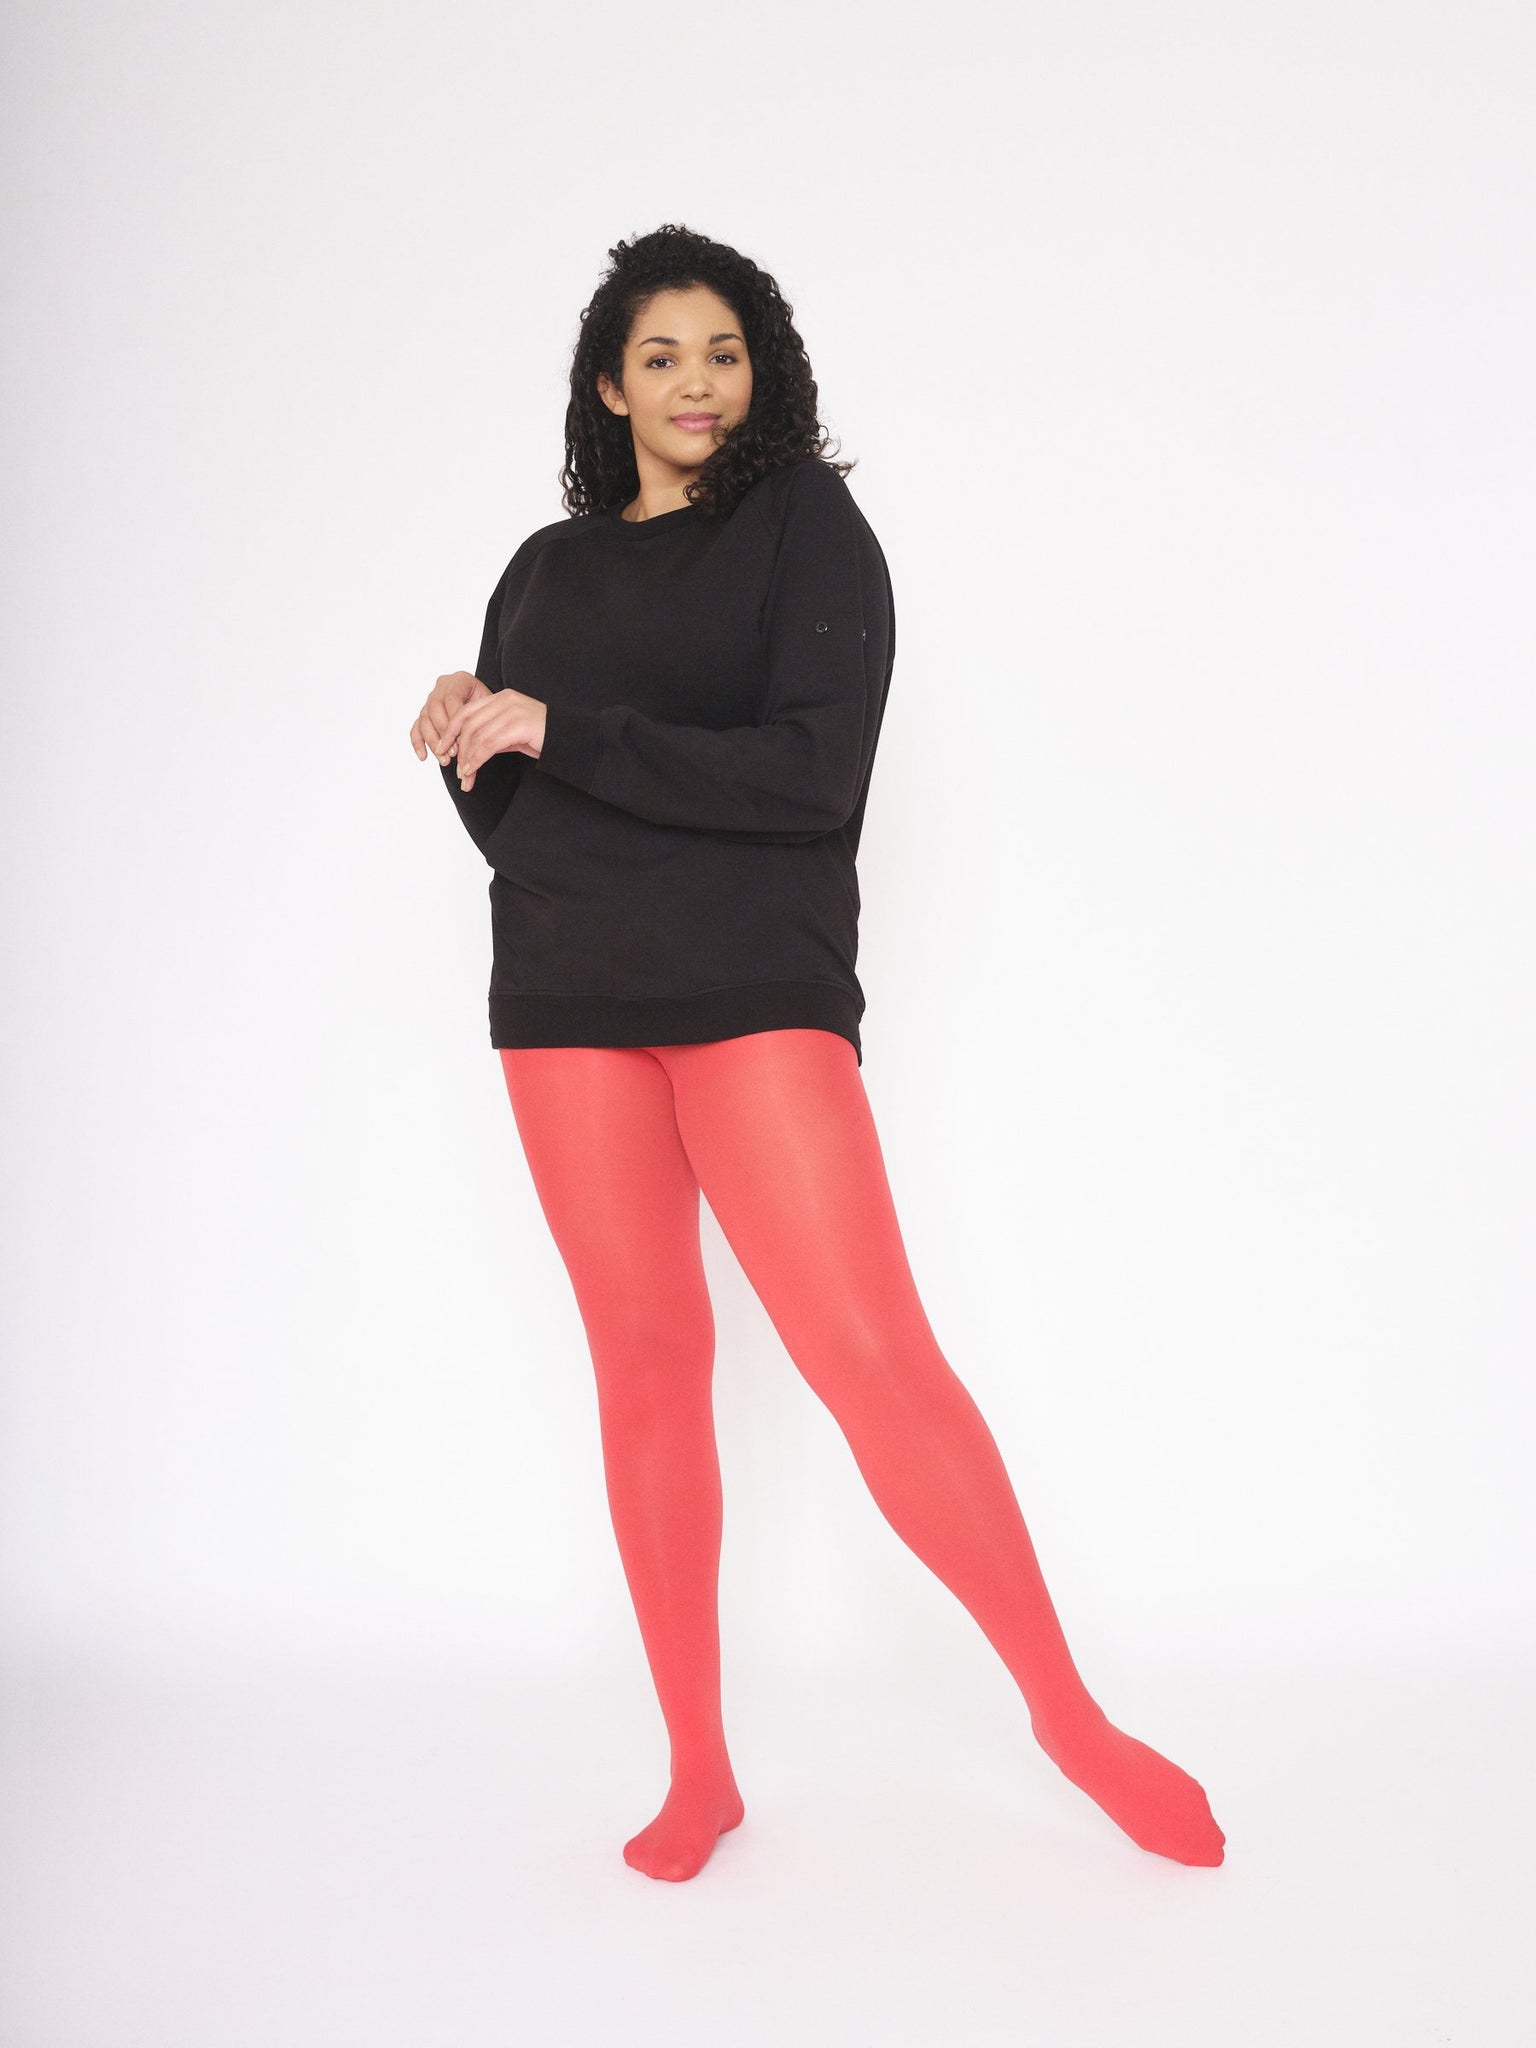  Citystl Opaque Red Tights For Women, 80D Tummy